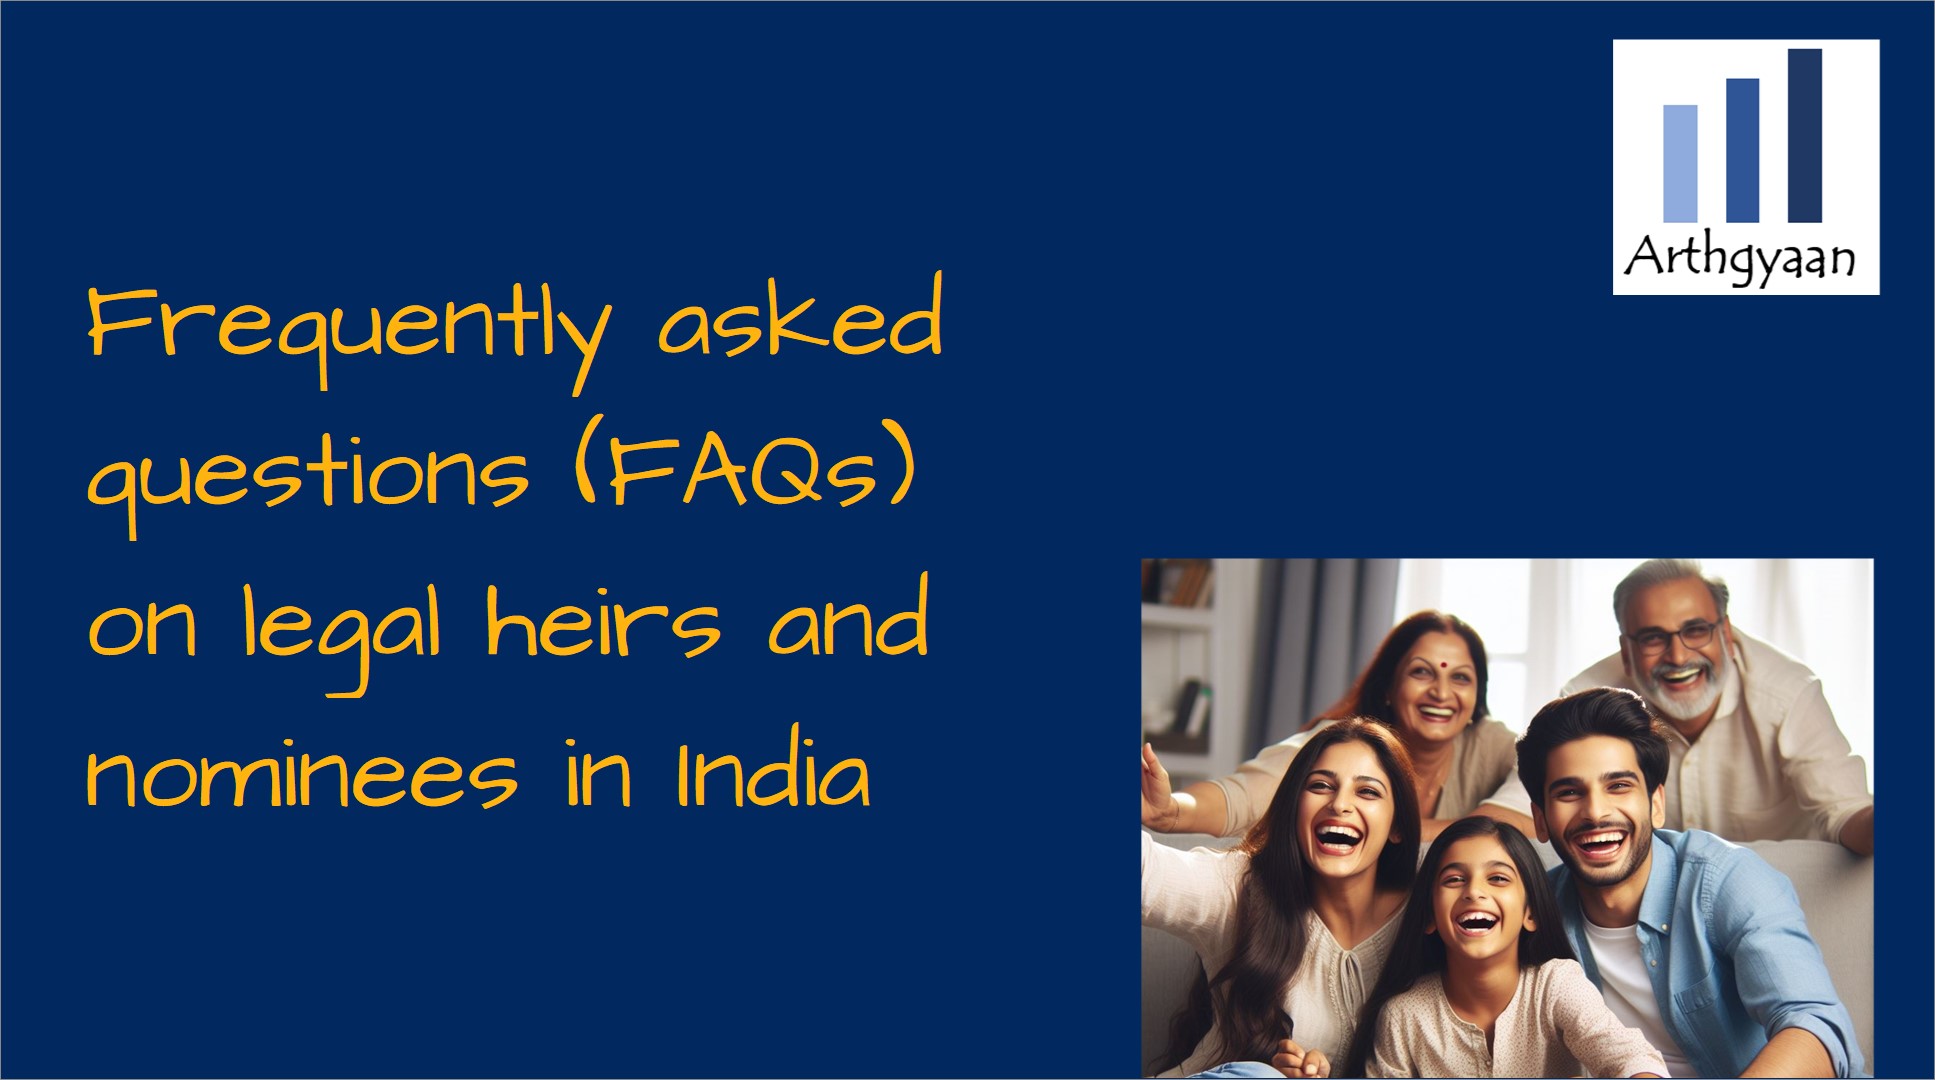 Frequently asked questions (FAQs) on legal heirs and nominees in India